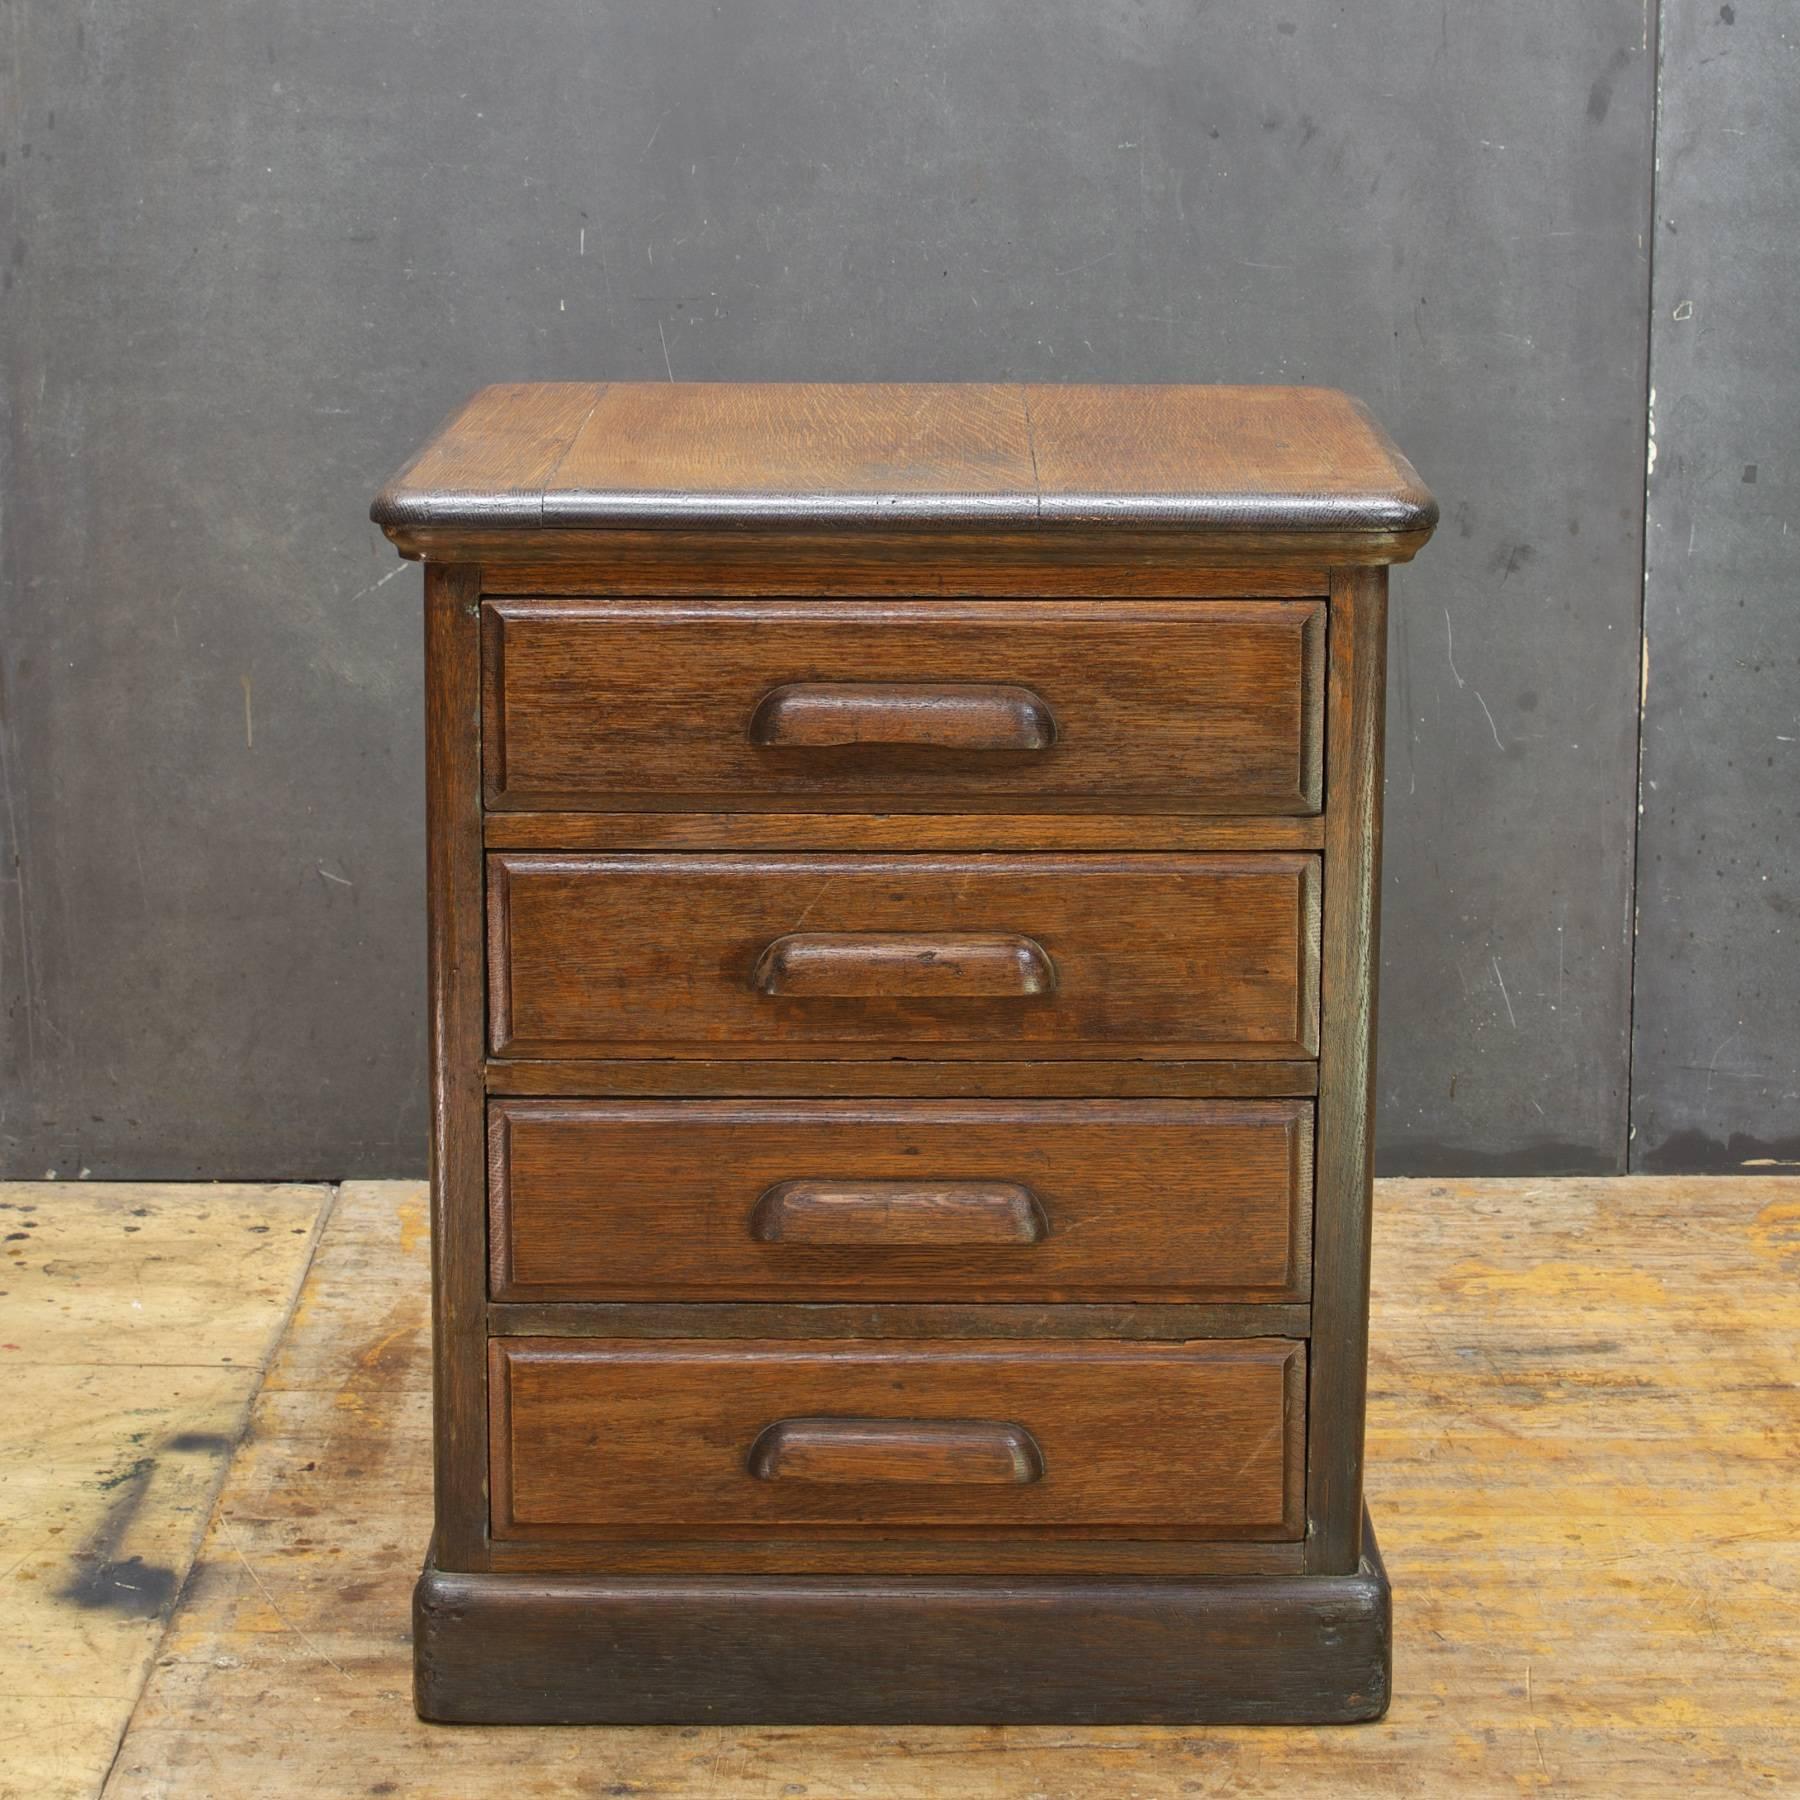 USA, c.1900s. Early 20th century writing chest of drawers, tabletop atelier. Or now use as an end table. Heavy time worn patina. Writing board slides out to either side.

Measure: Drawer depths are 4.25 in. Writing board slides completely out on